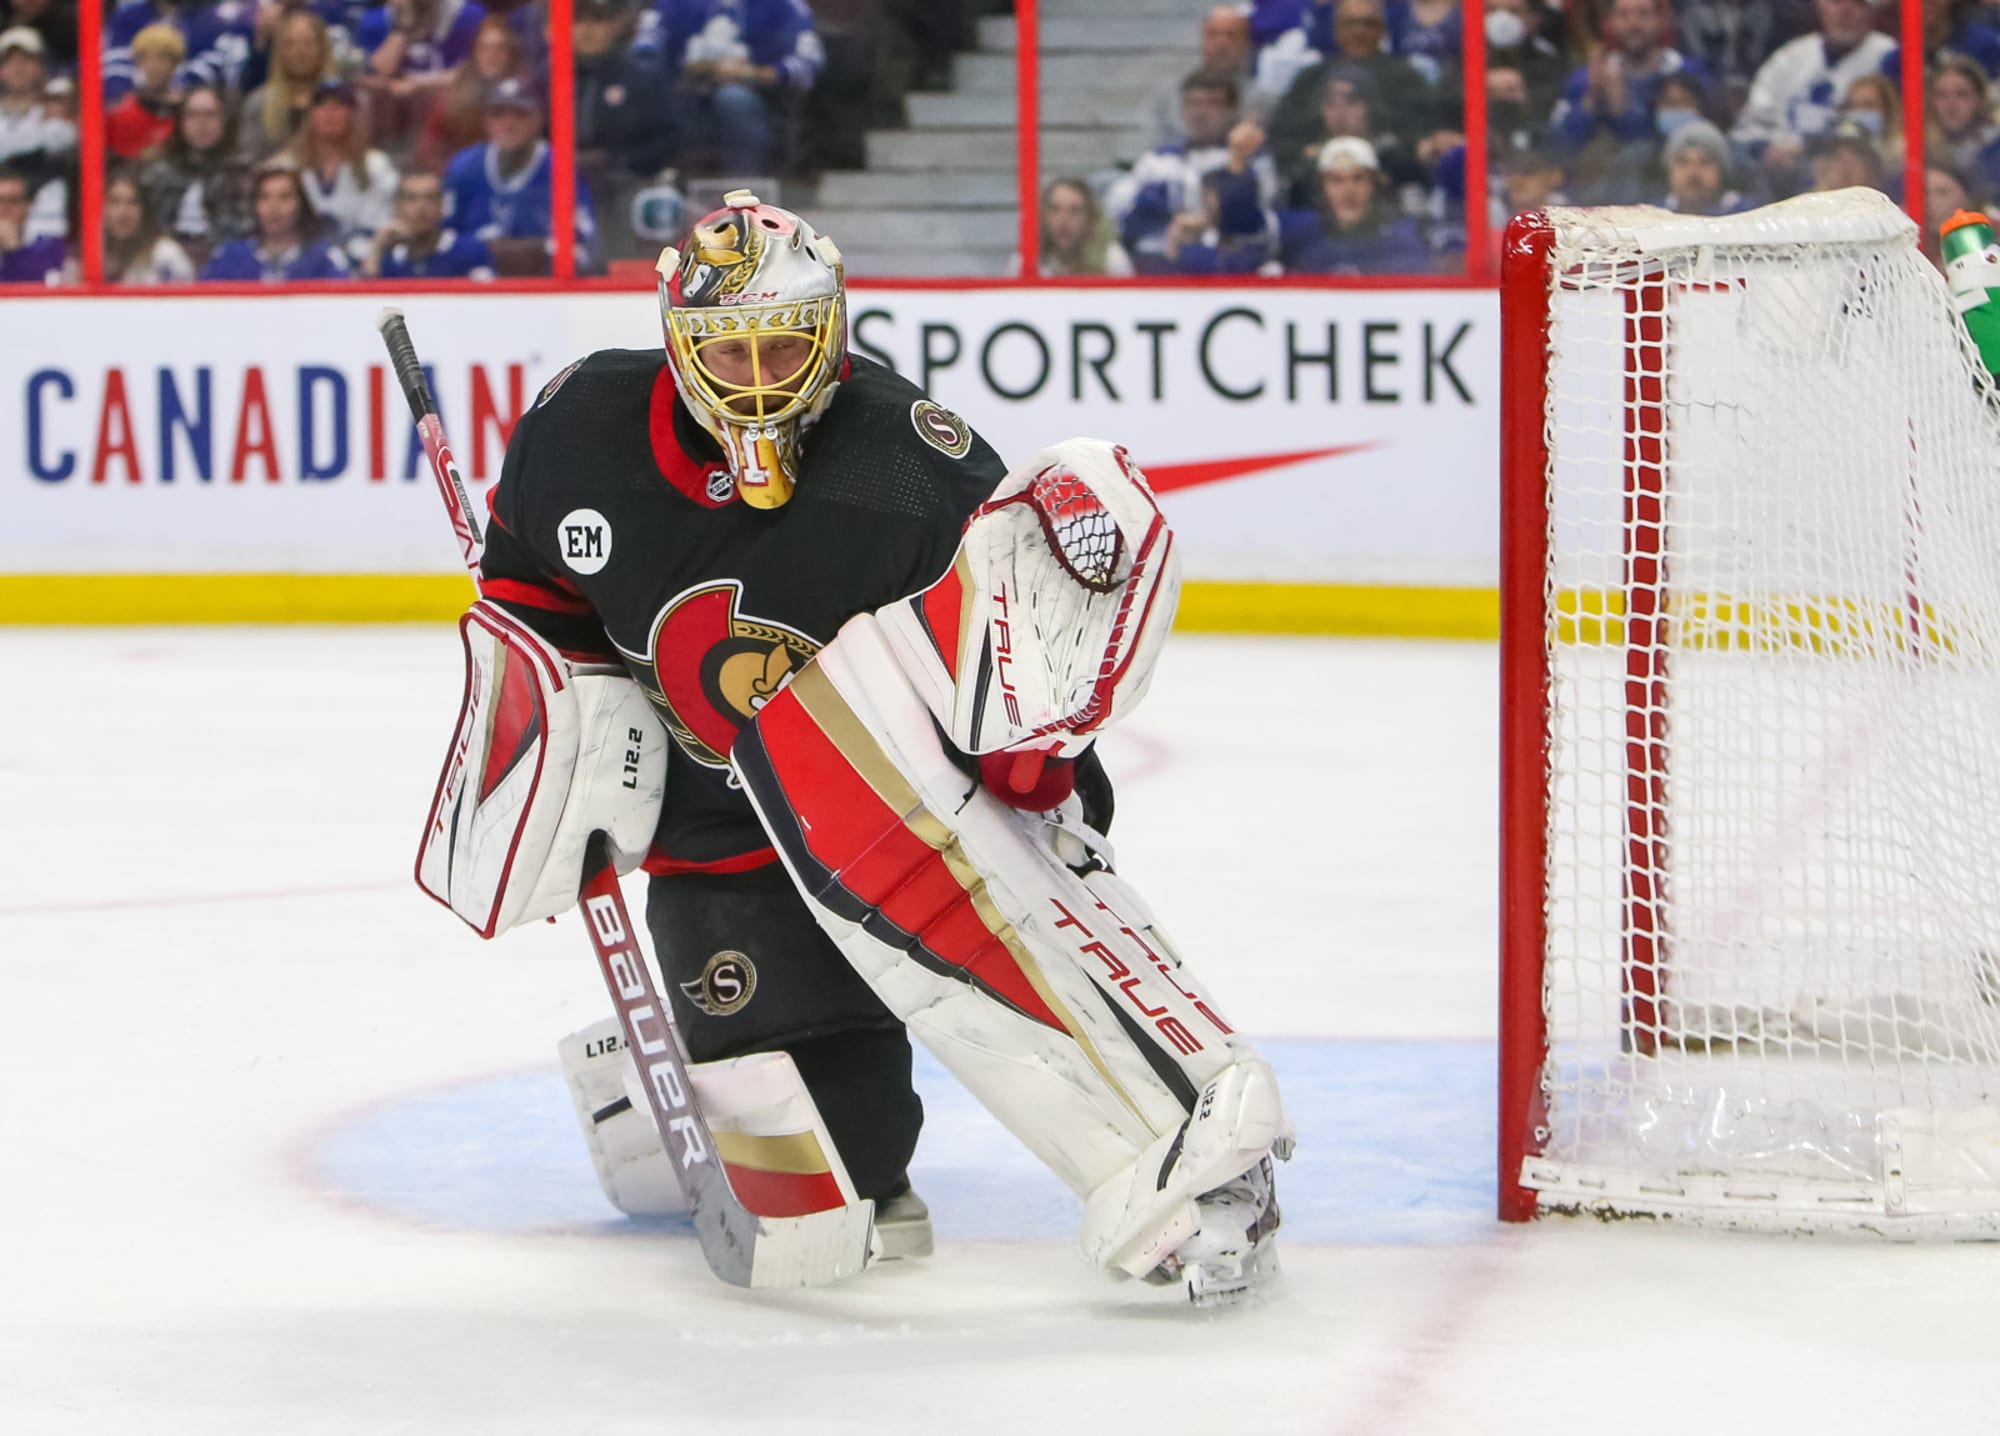 Rock solid' arena deal key to keeping Sens in Ottawa, sports observer says